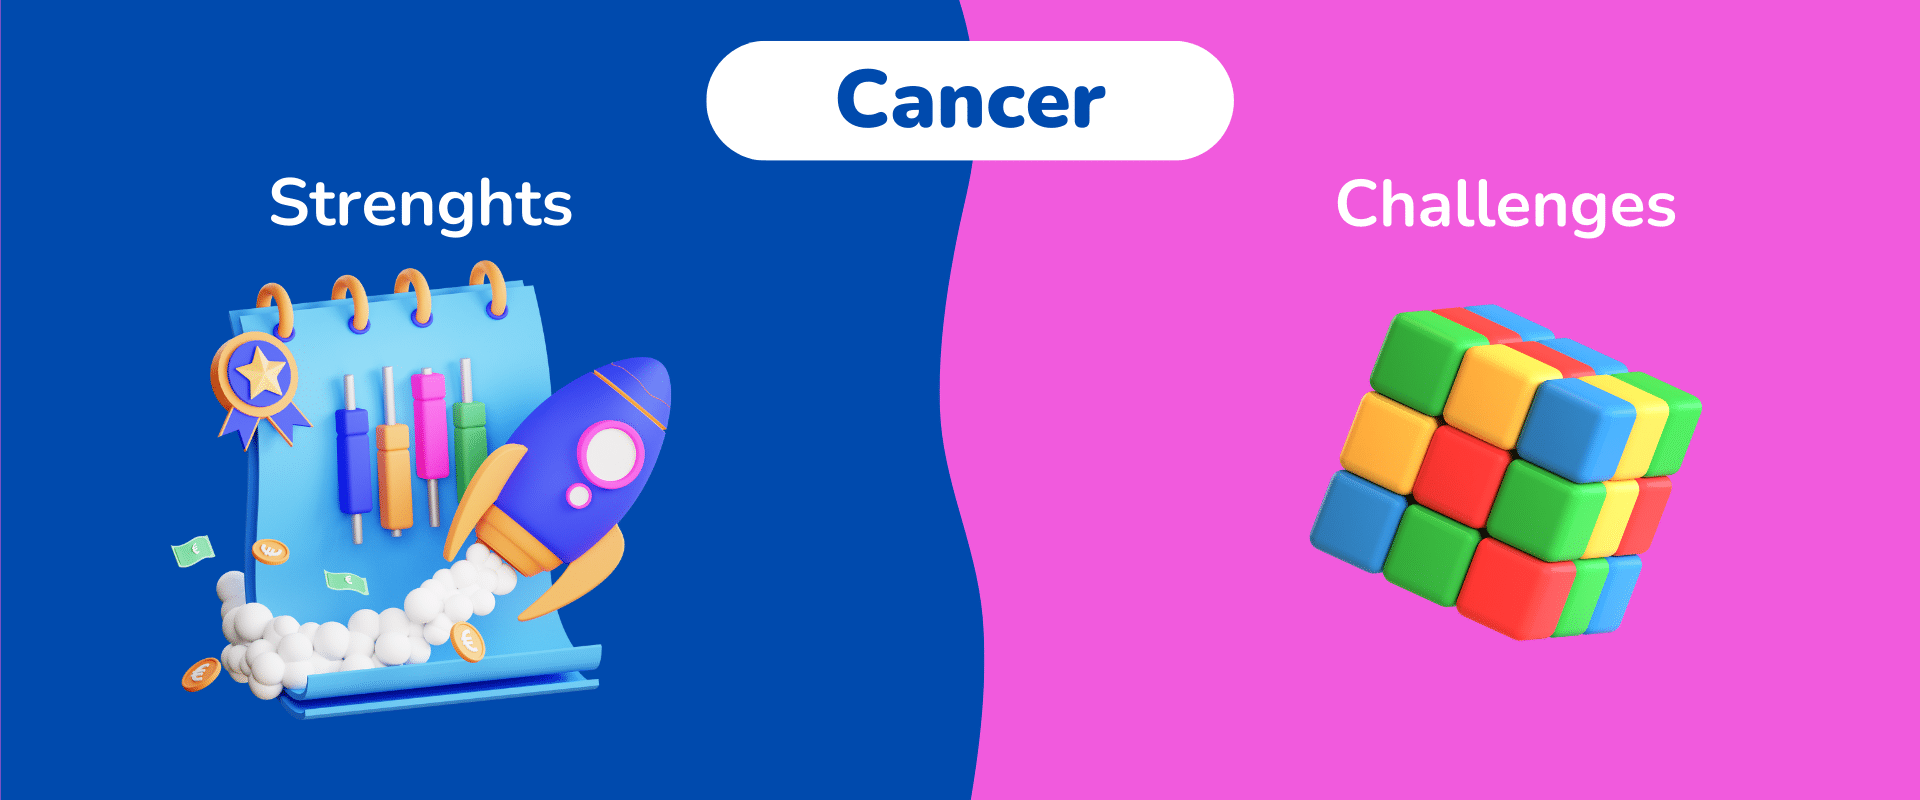 Cancer strenghts and challenges